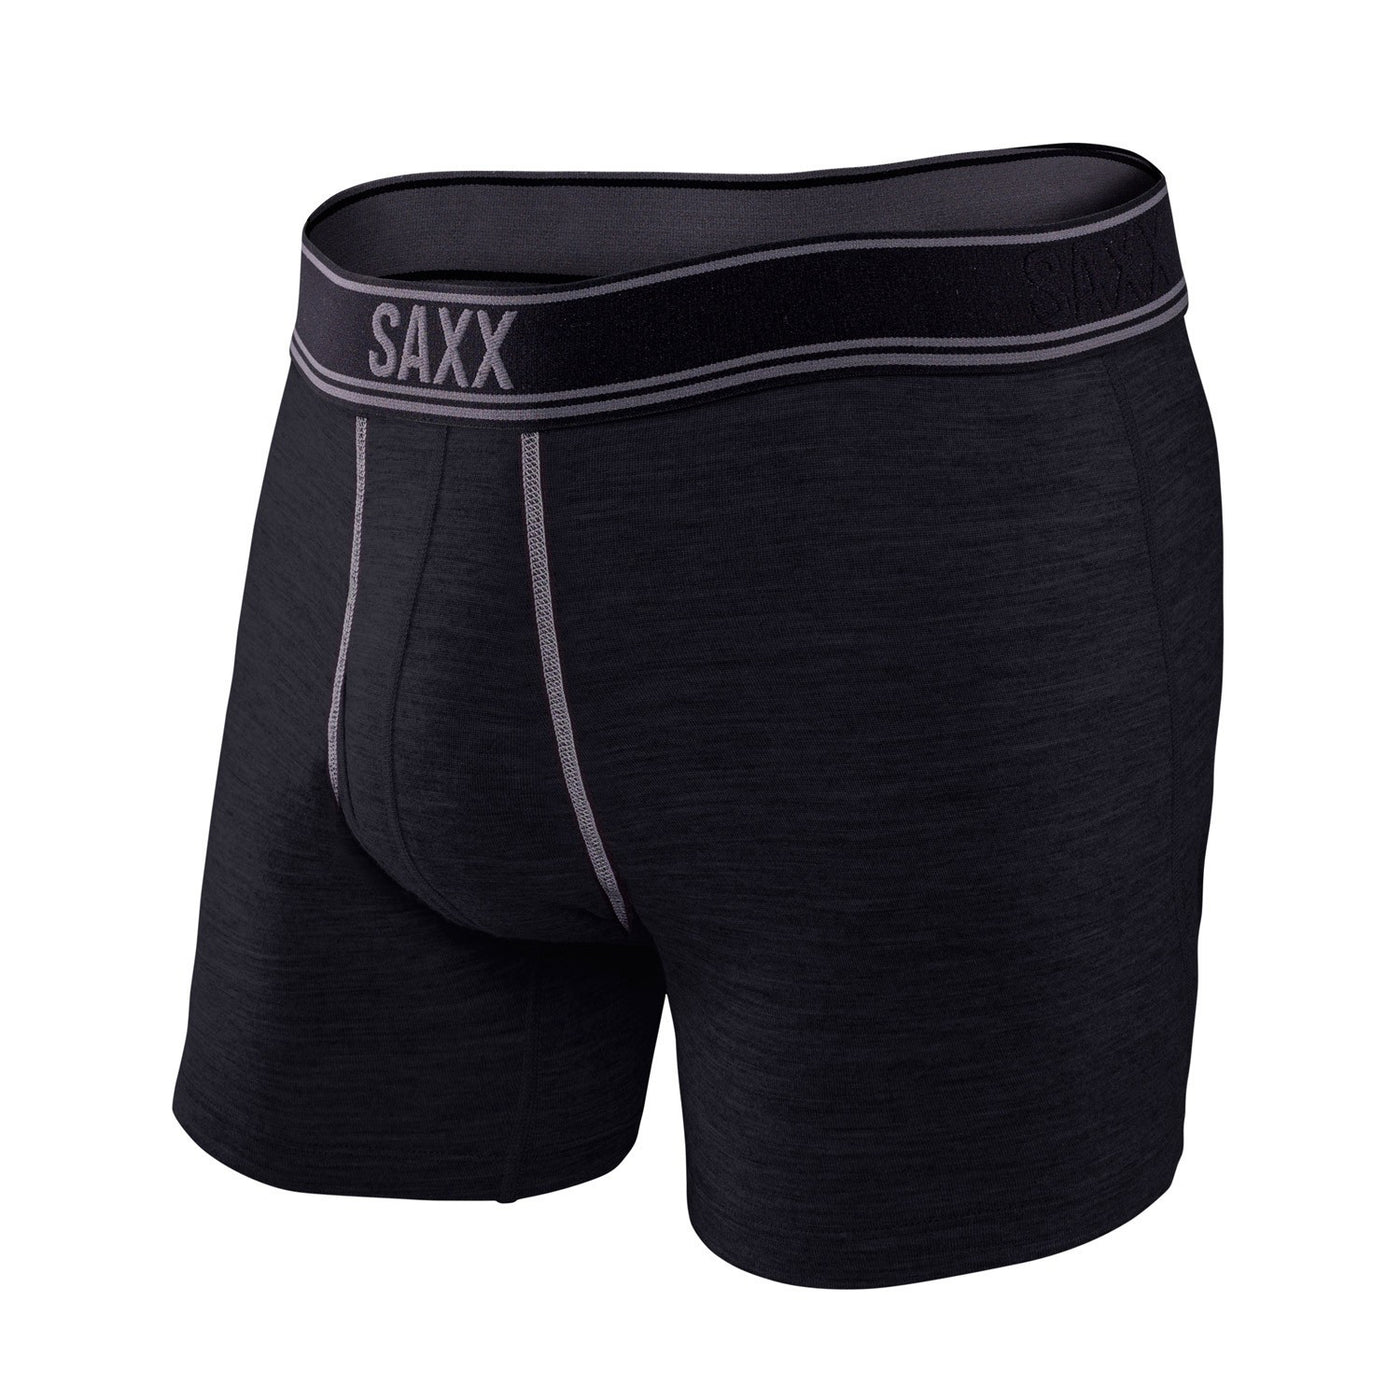 Saxx Platinum Boxer Brief With Fly Slate/Silver SXBB41F - Baer's Den